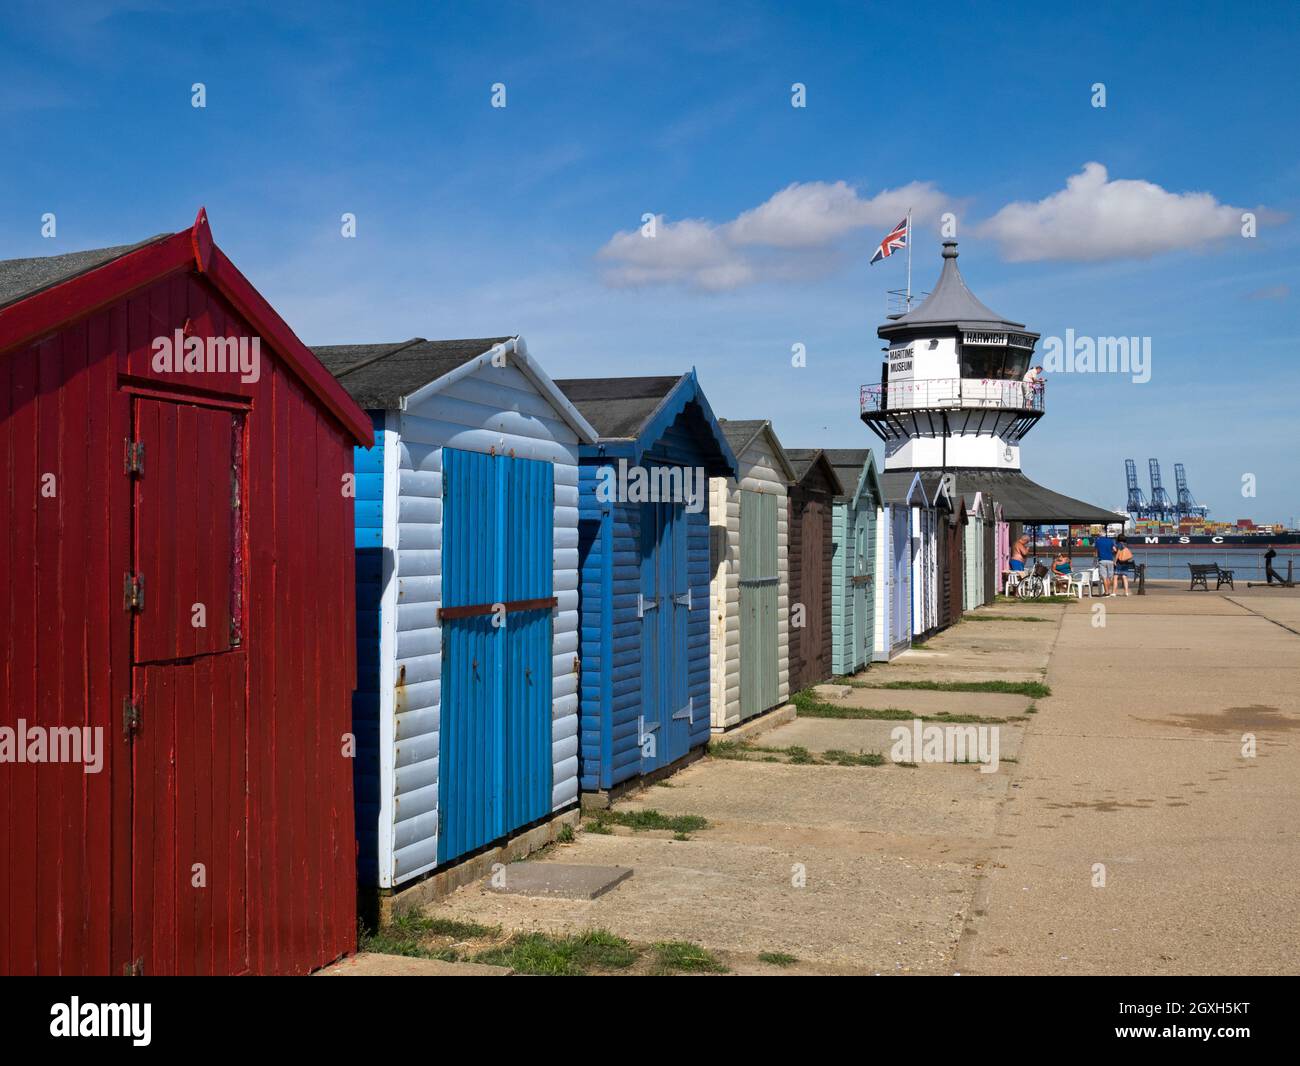 Row of Colourful Beach Huts with Harwich Low Lighthouse, Maritime Museum, & Felixstowe Container Port distance, Harwich, Essex,  England, UK Stock Photo